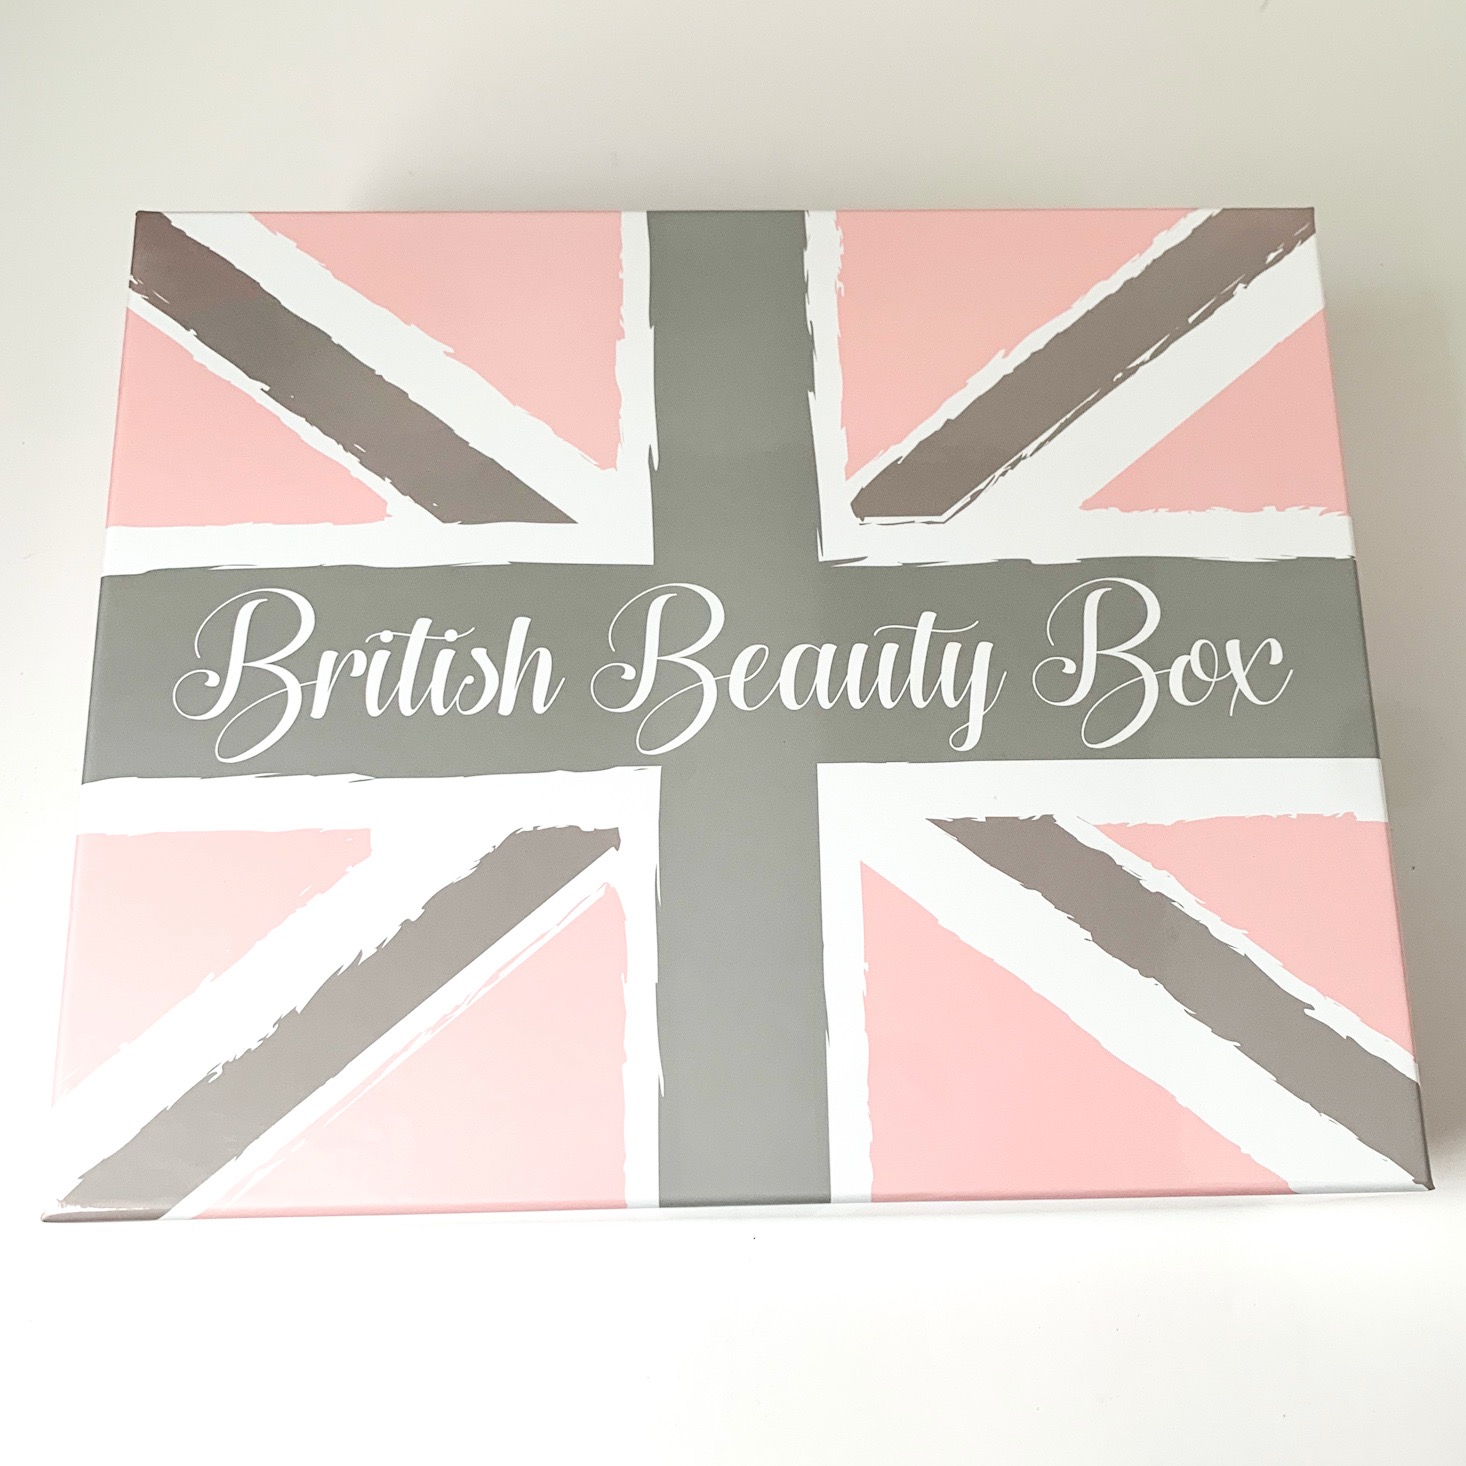 British Beauty Box “Let It Glow” Review – Winter 2019